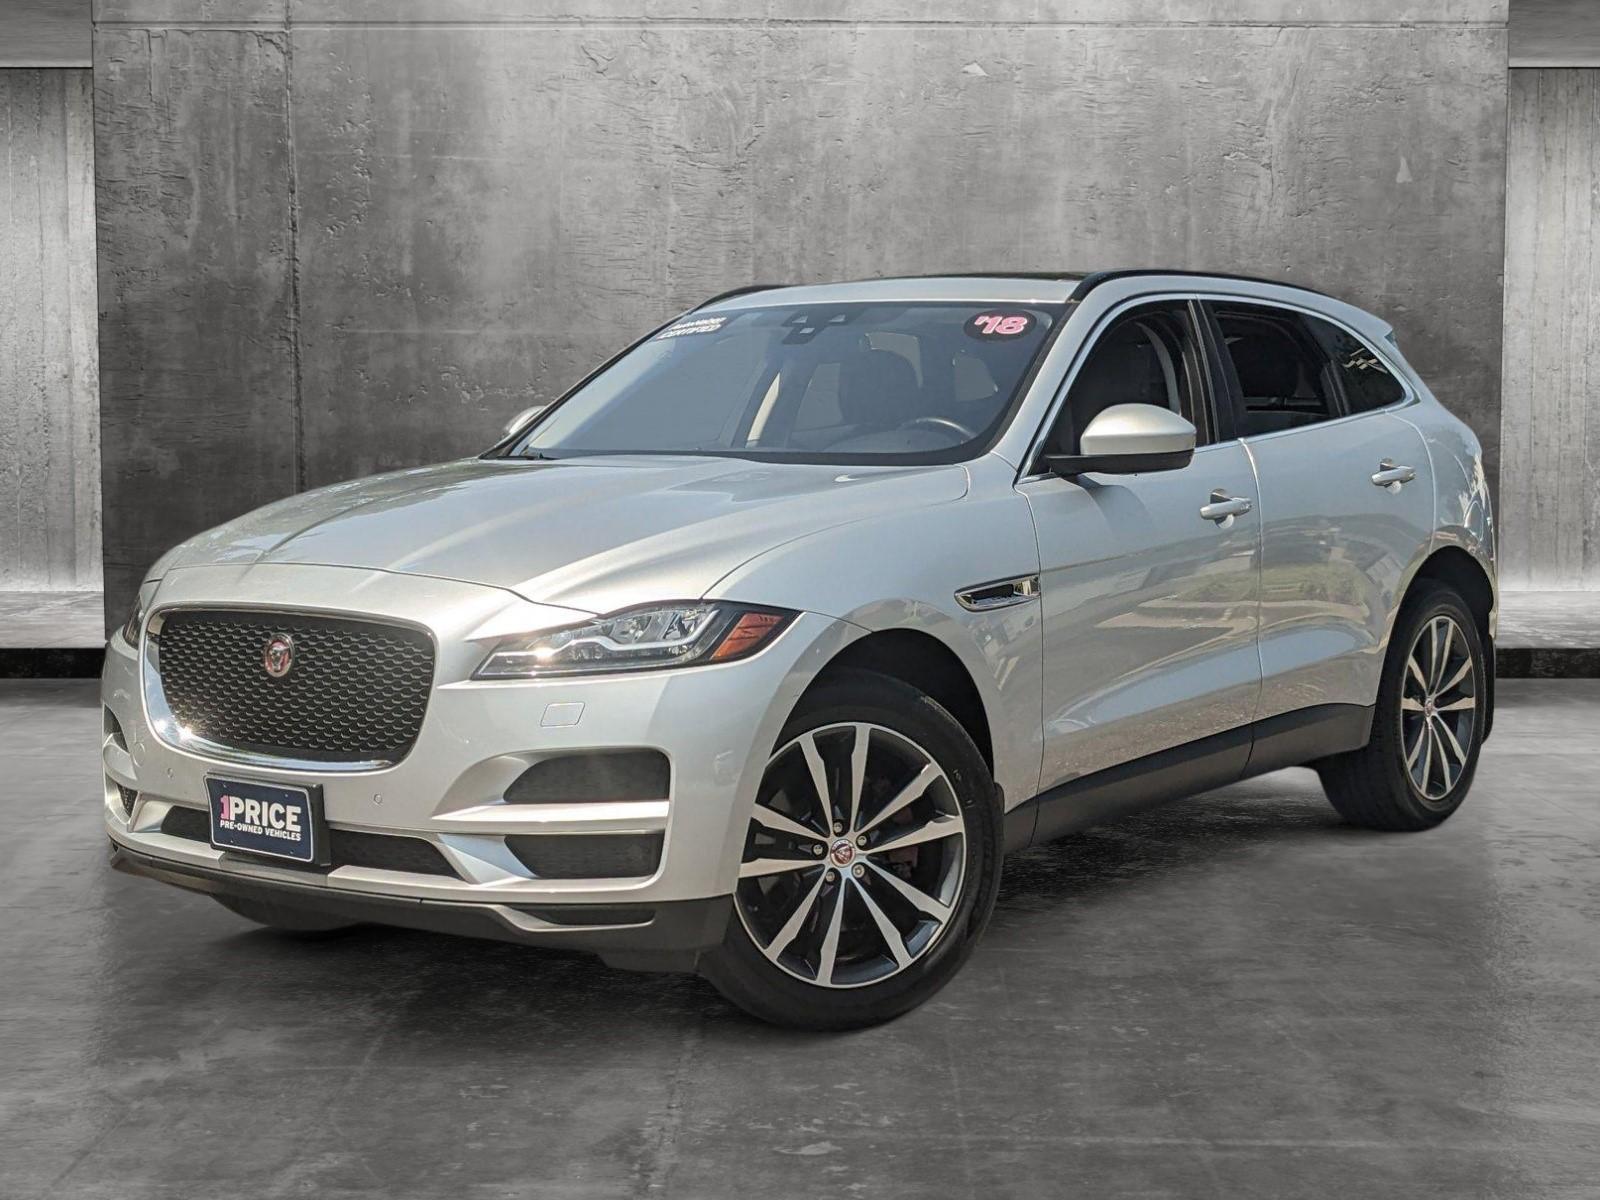 2018 Jaguar F-PACE Vehicle Photo in Towson, MD 21204